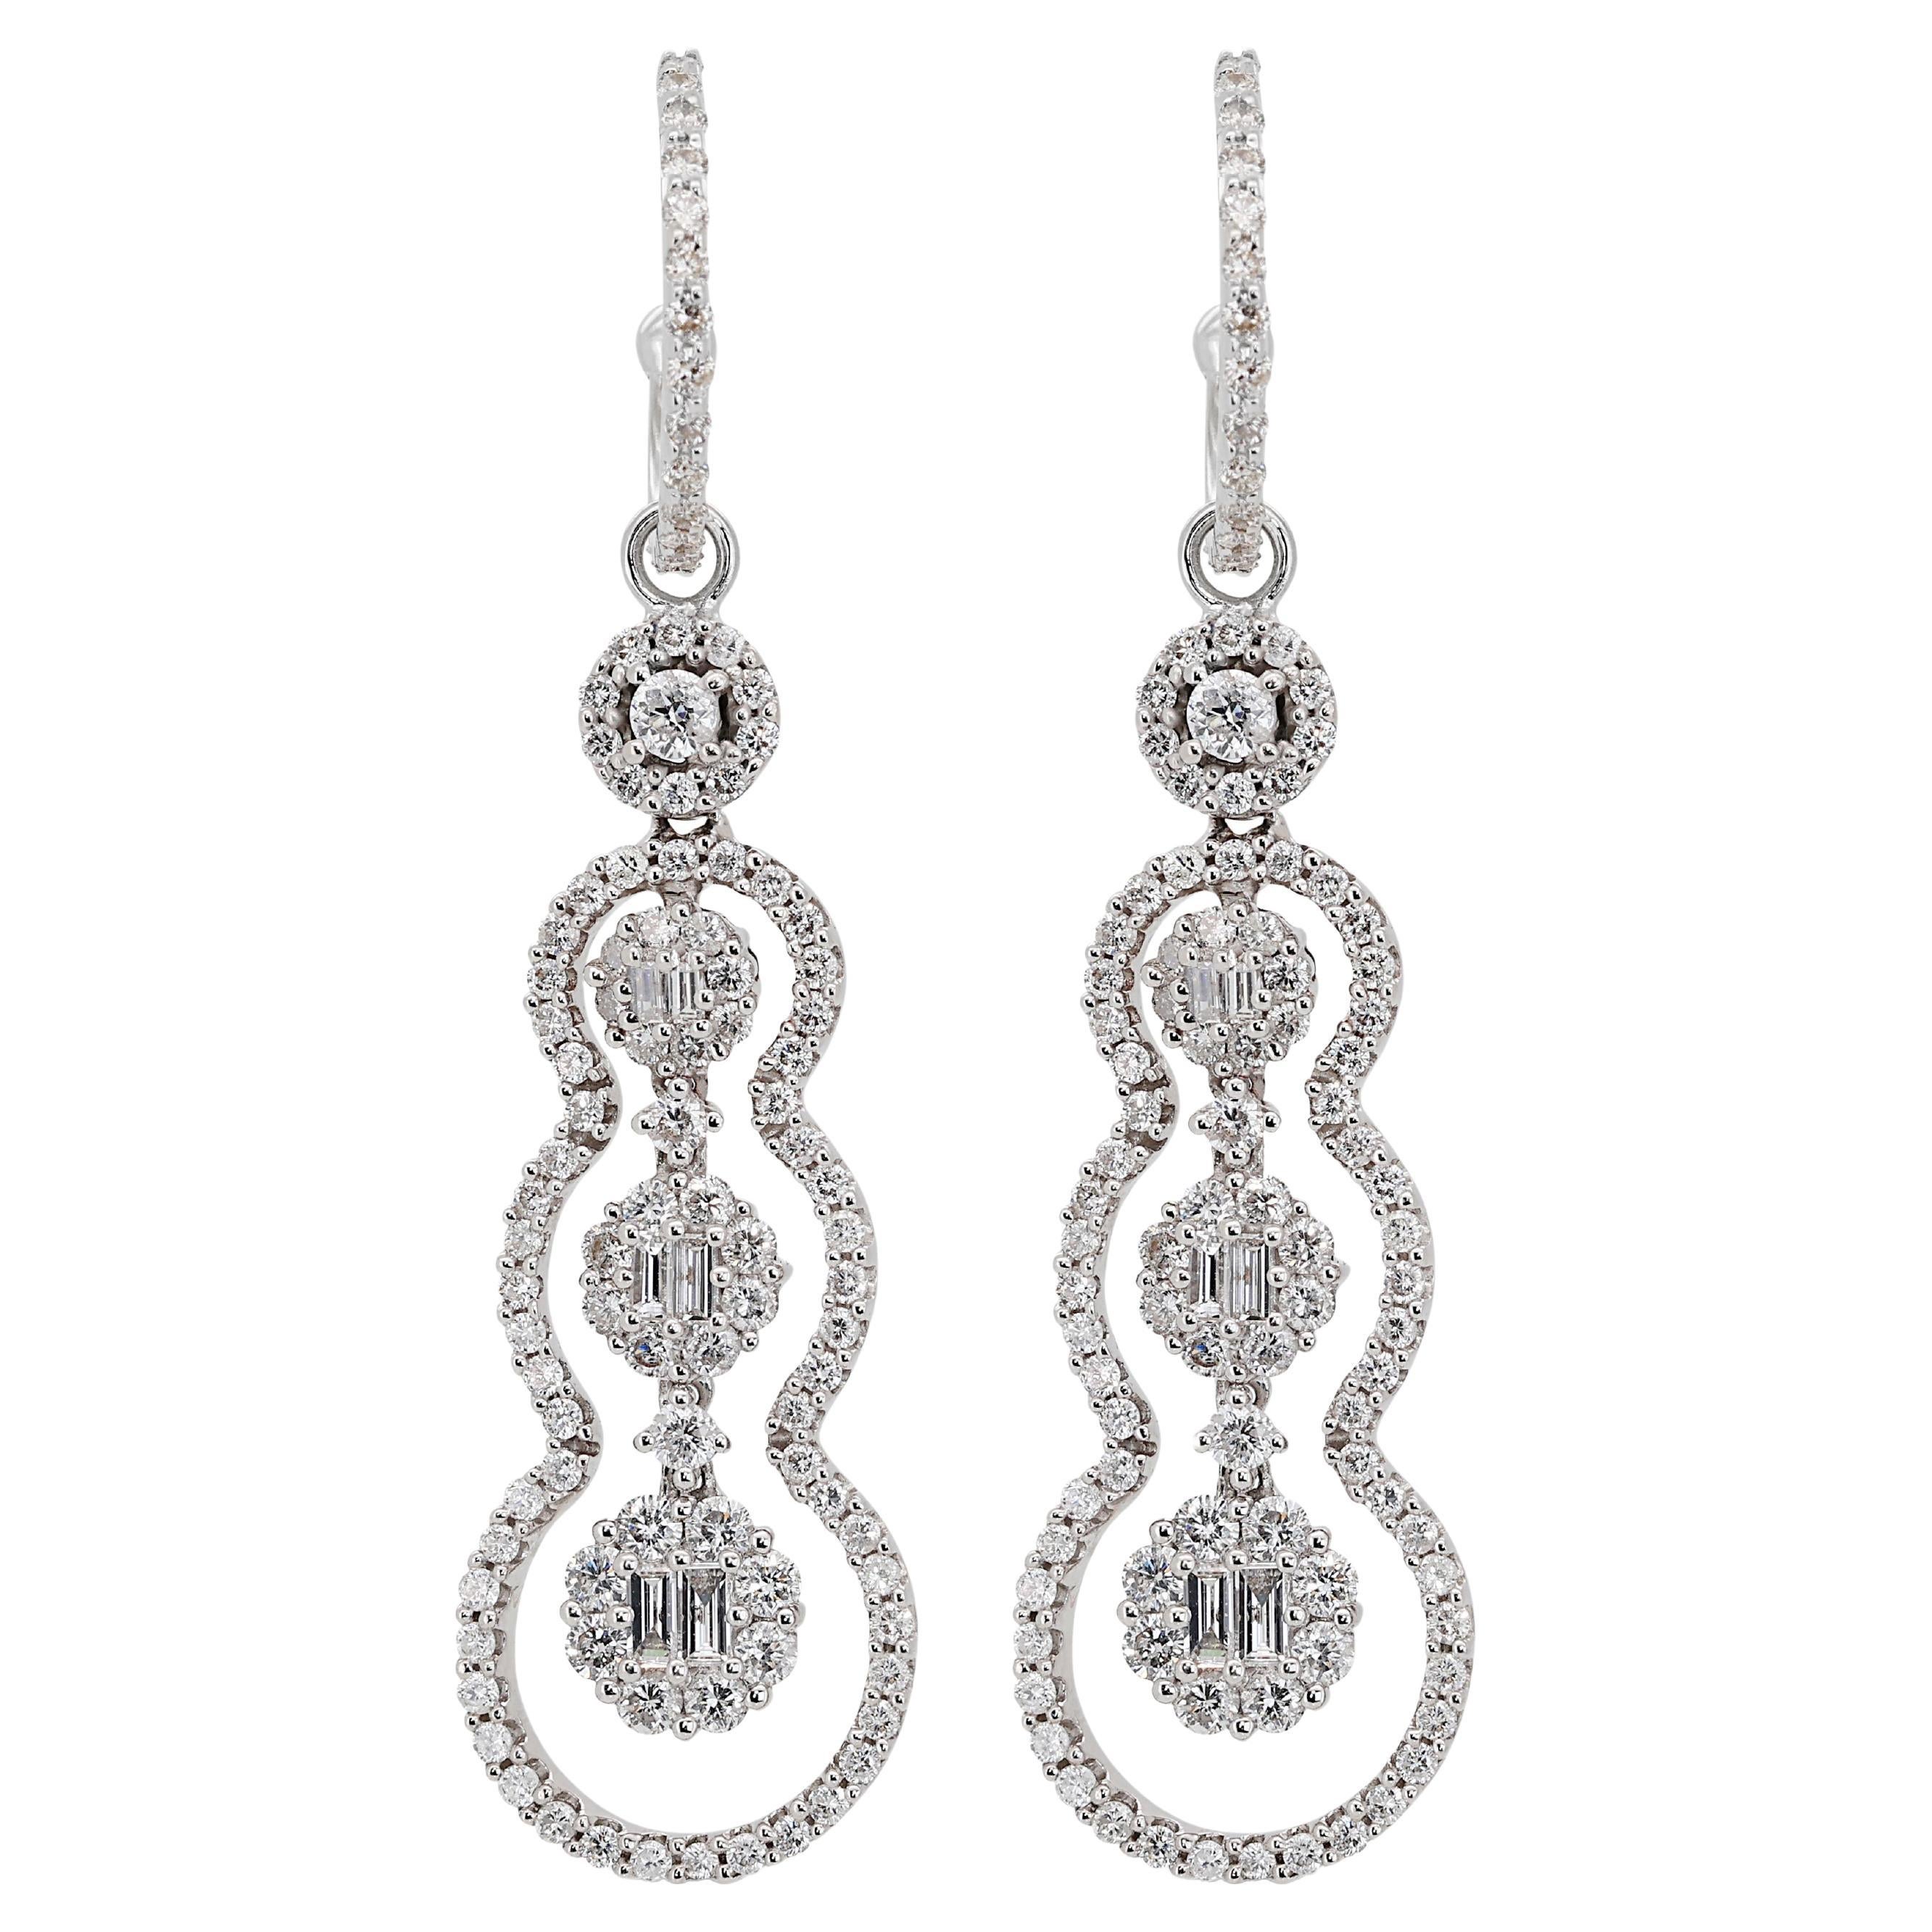 Stylish 3.50ct. Round Brilliant & Baguette Dangling Diamond Earrings For Sale